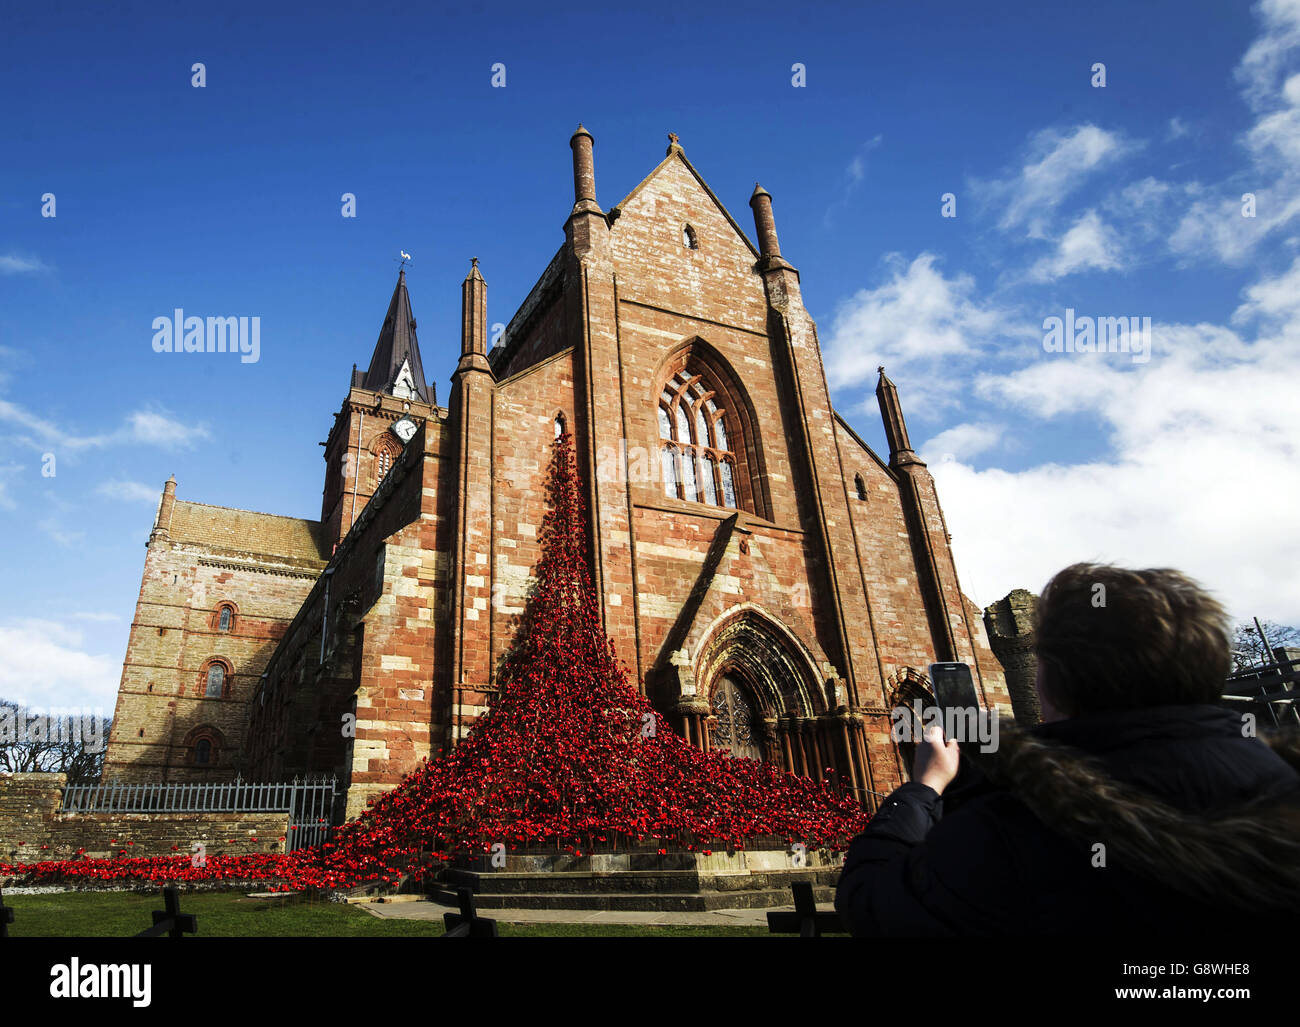 The Weeping Window sculpture made of ceramic poppies at St Magnus Cathedral in Orkney, Scotland. Stock Photo